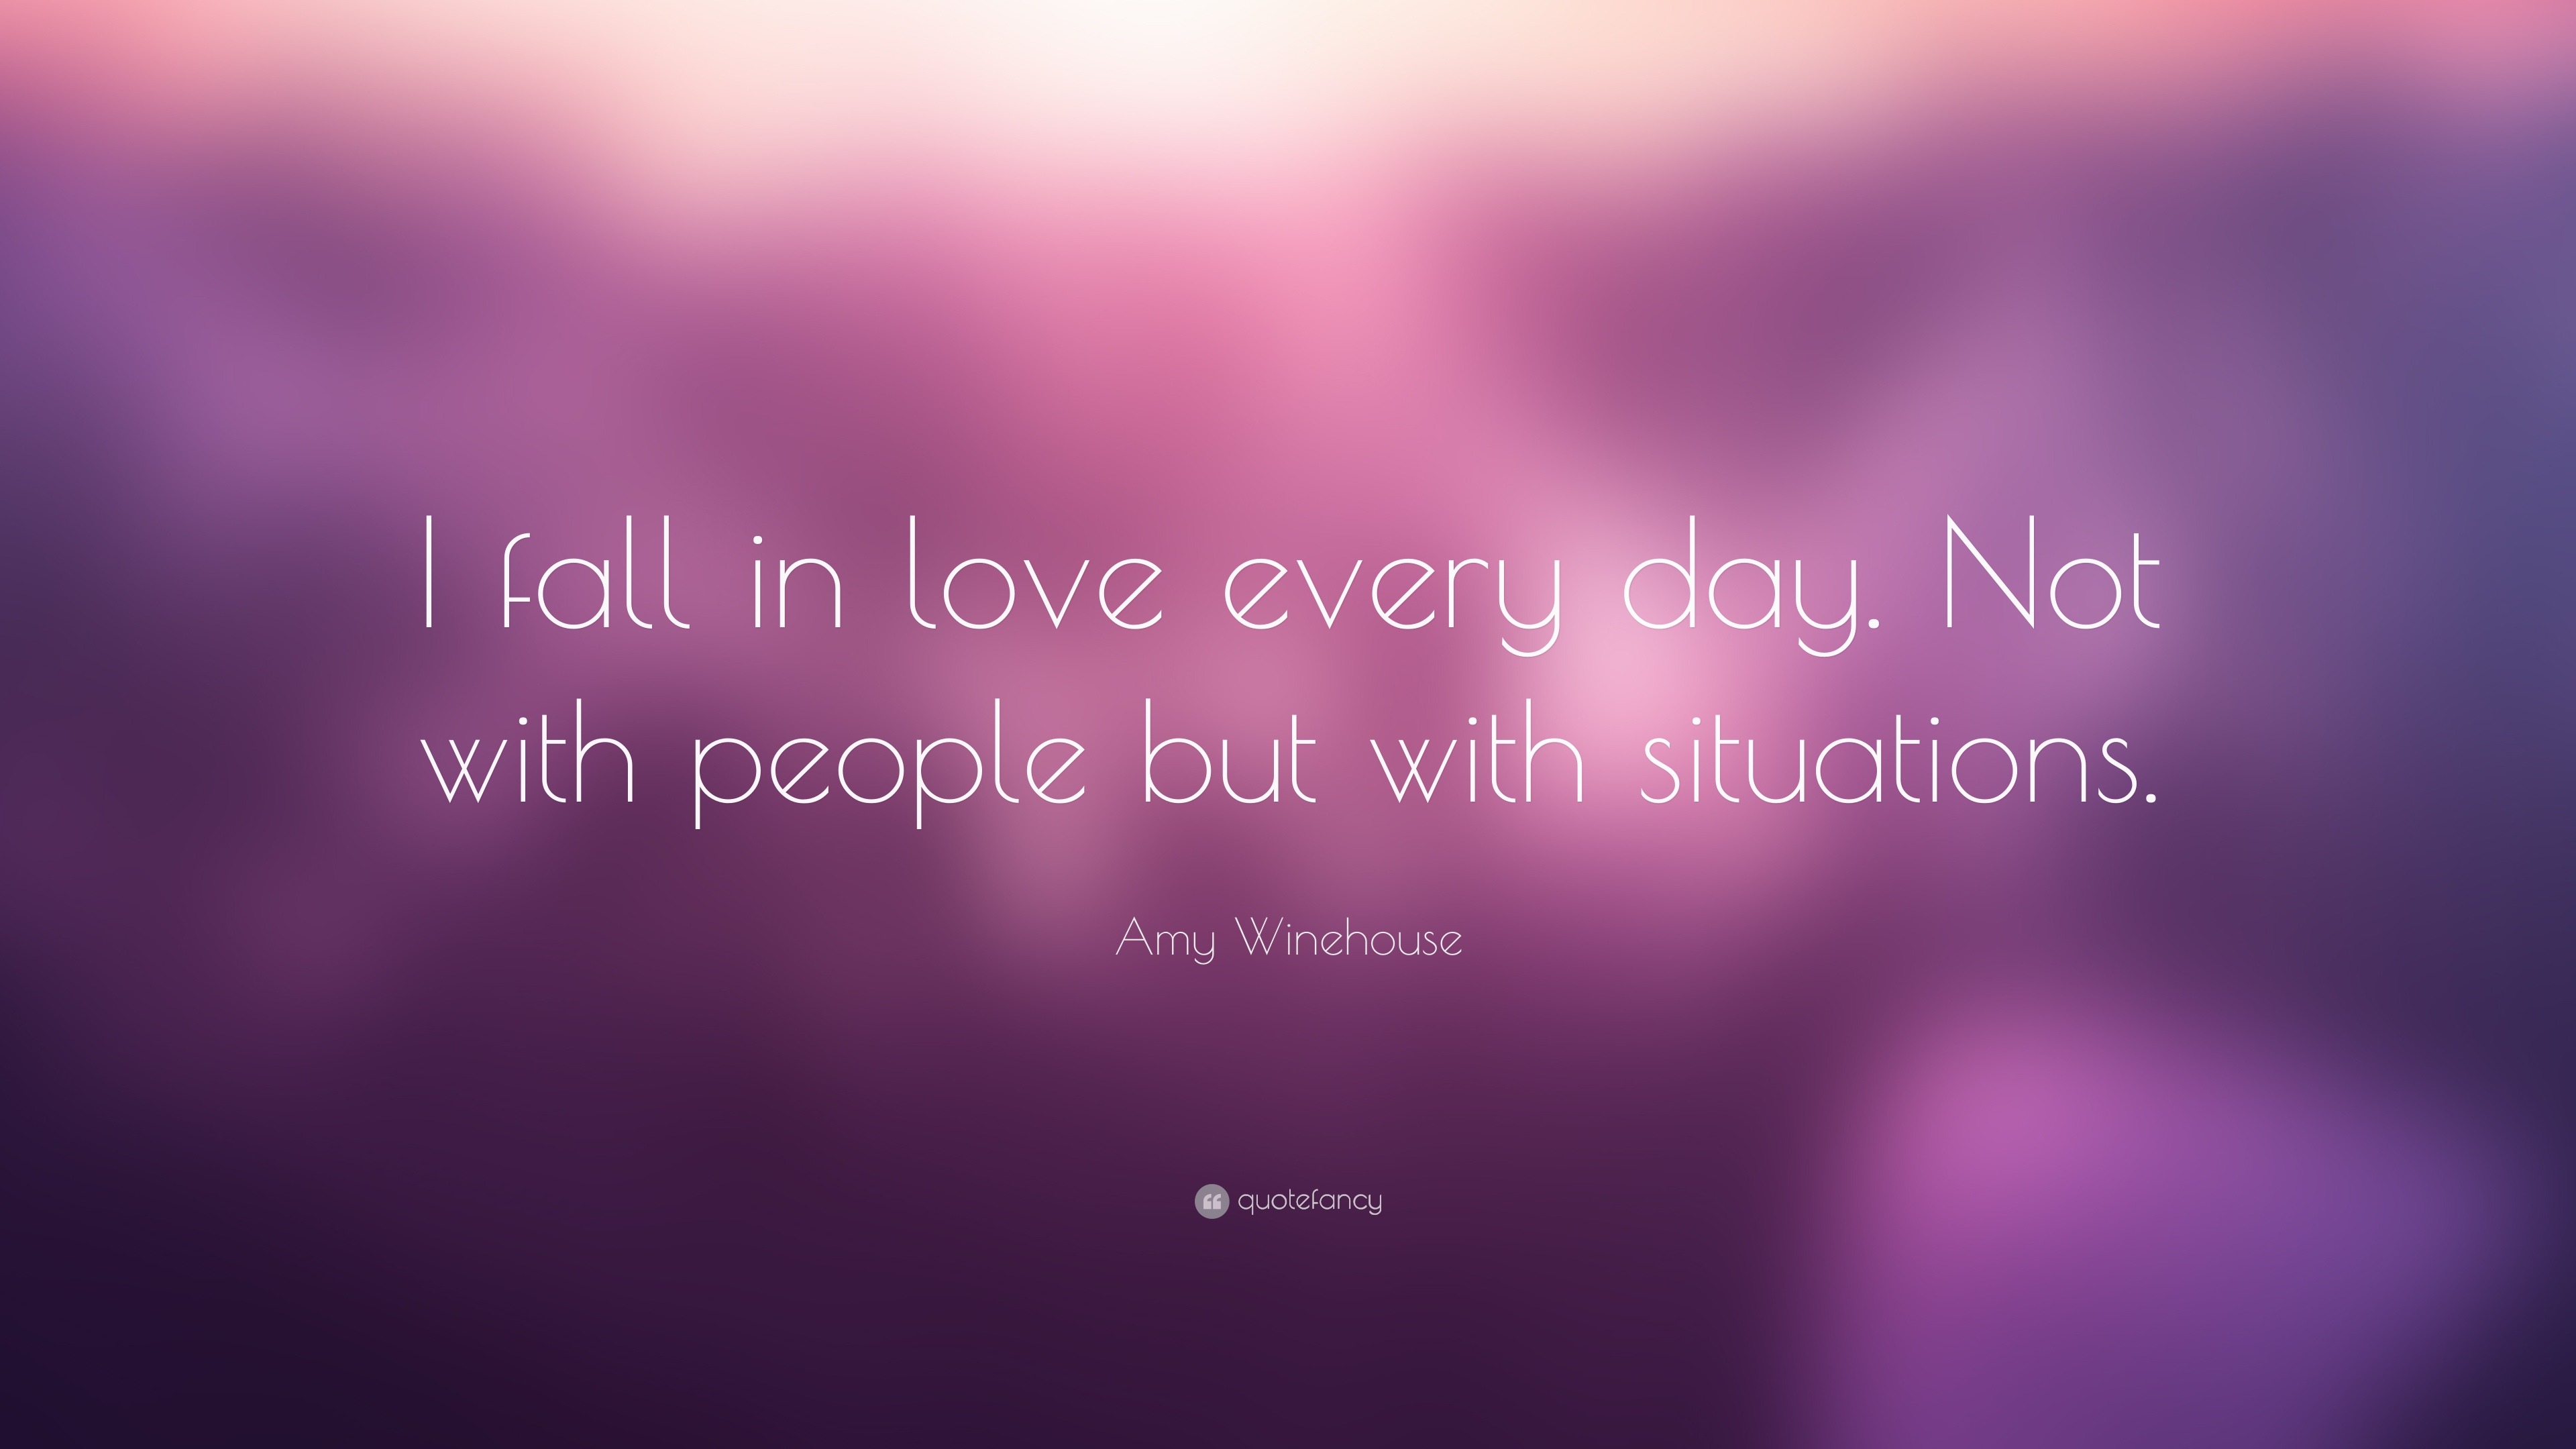 Amy Winehouse Quote: “I fall in love every day. Not with people but ...